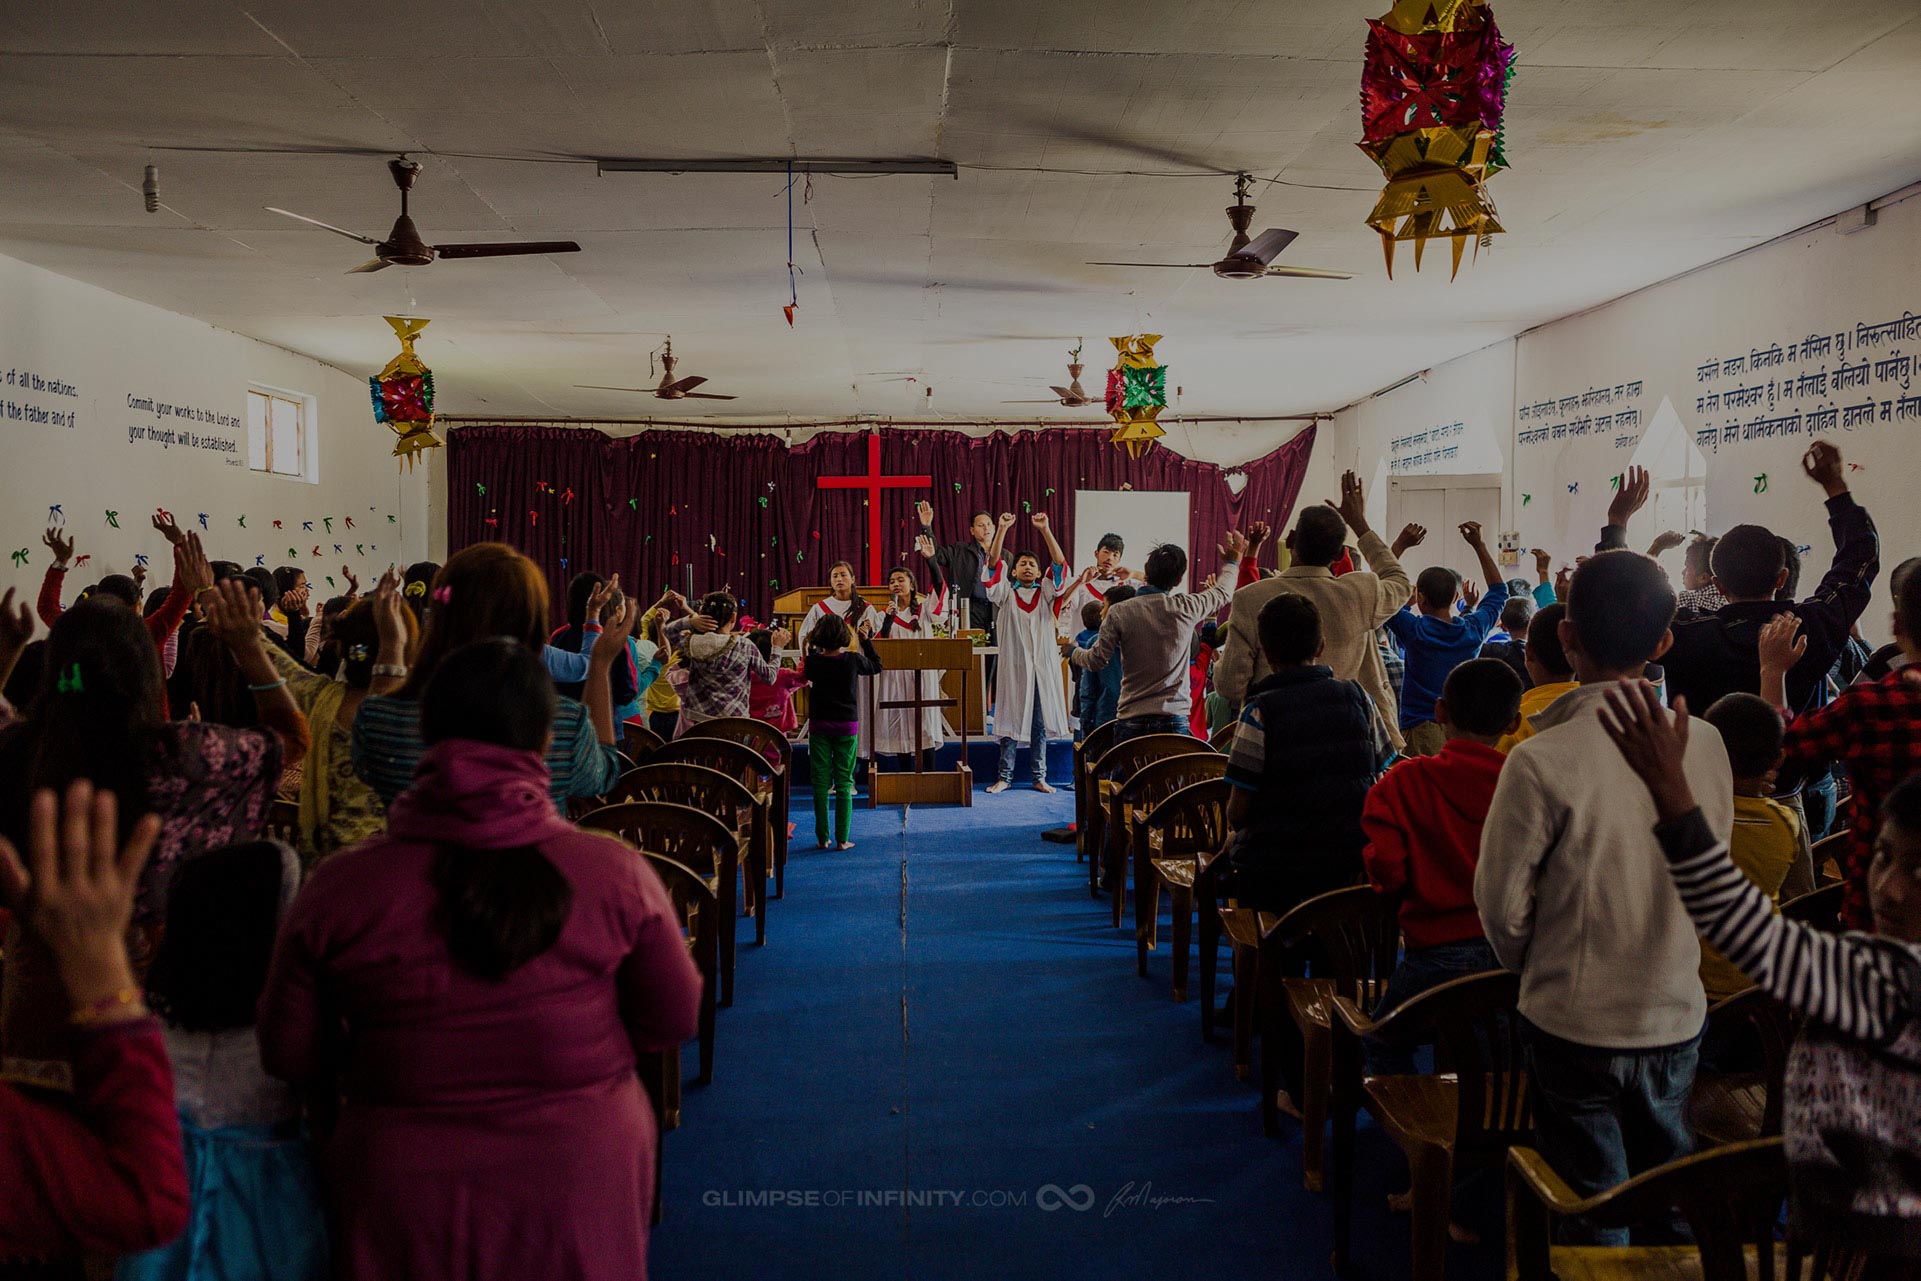 People in Nepal gather in a church to worship God.